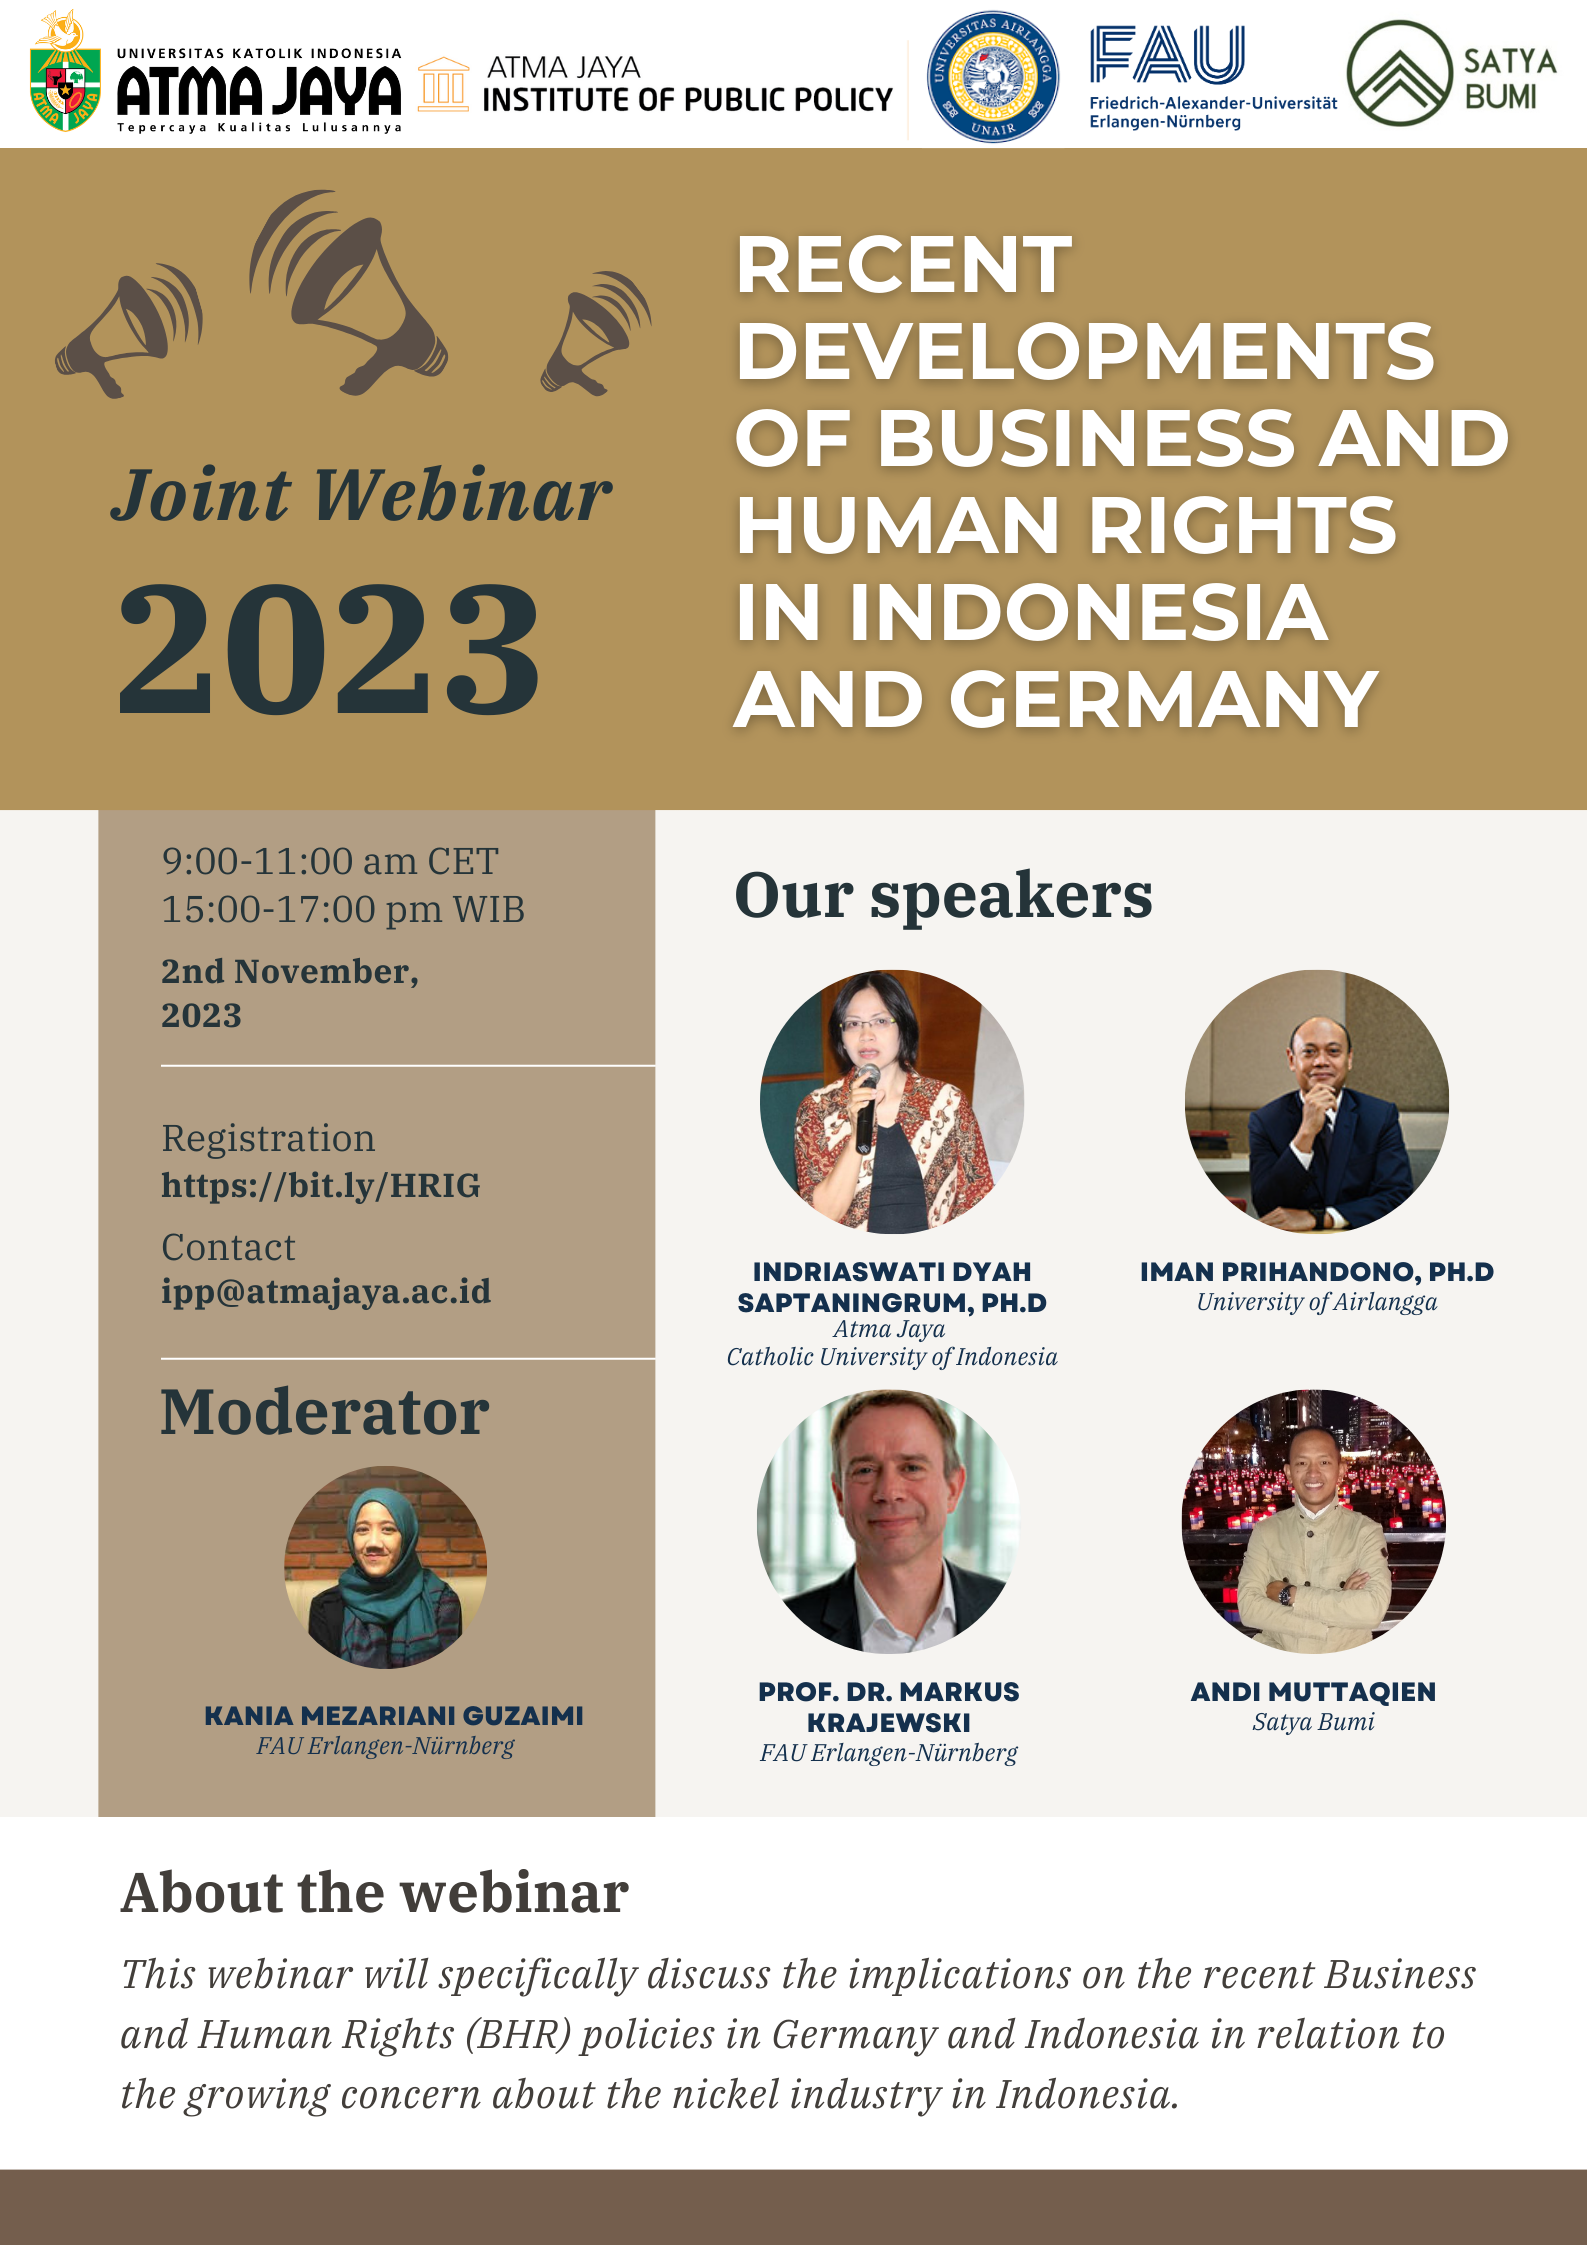 PUBLIC WEBINAR: RECENT DEVELOPMENTS OF BUSINESS AND HUMAN RIGHTS IN INDONESIA AND GERMANY